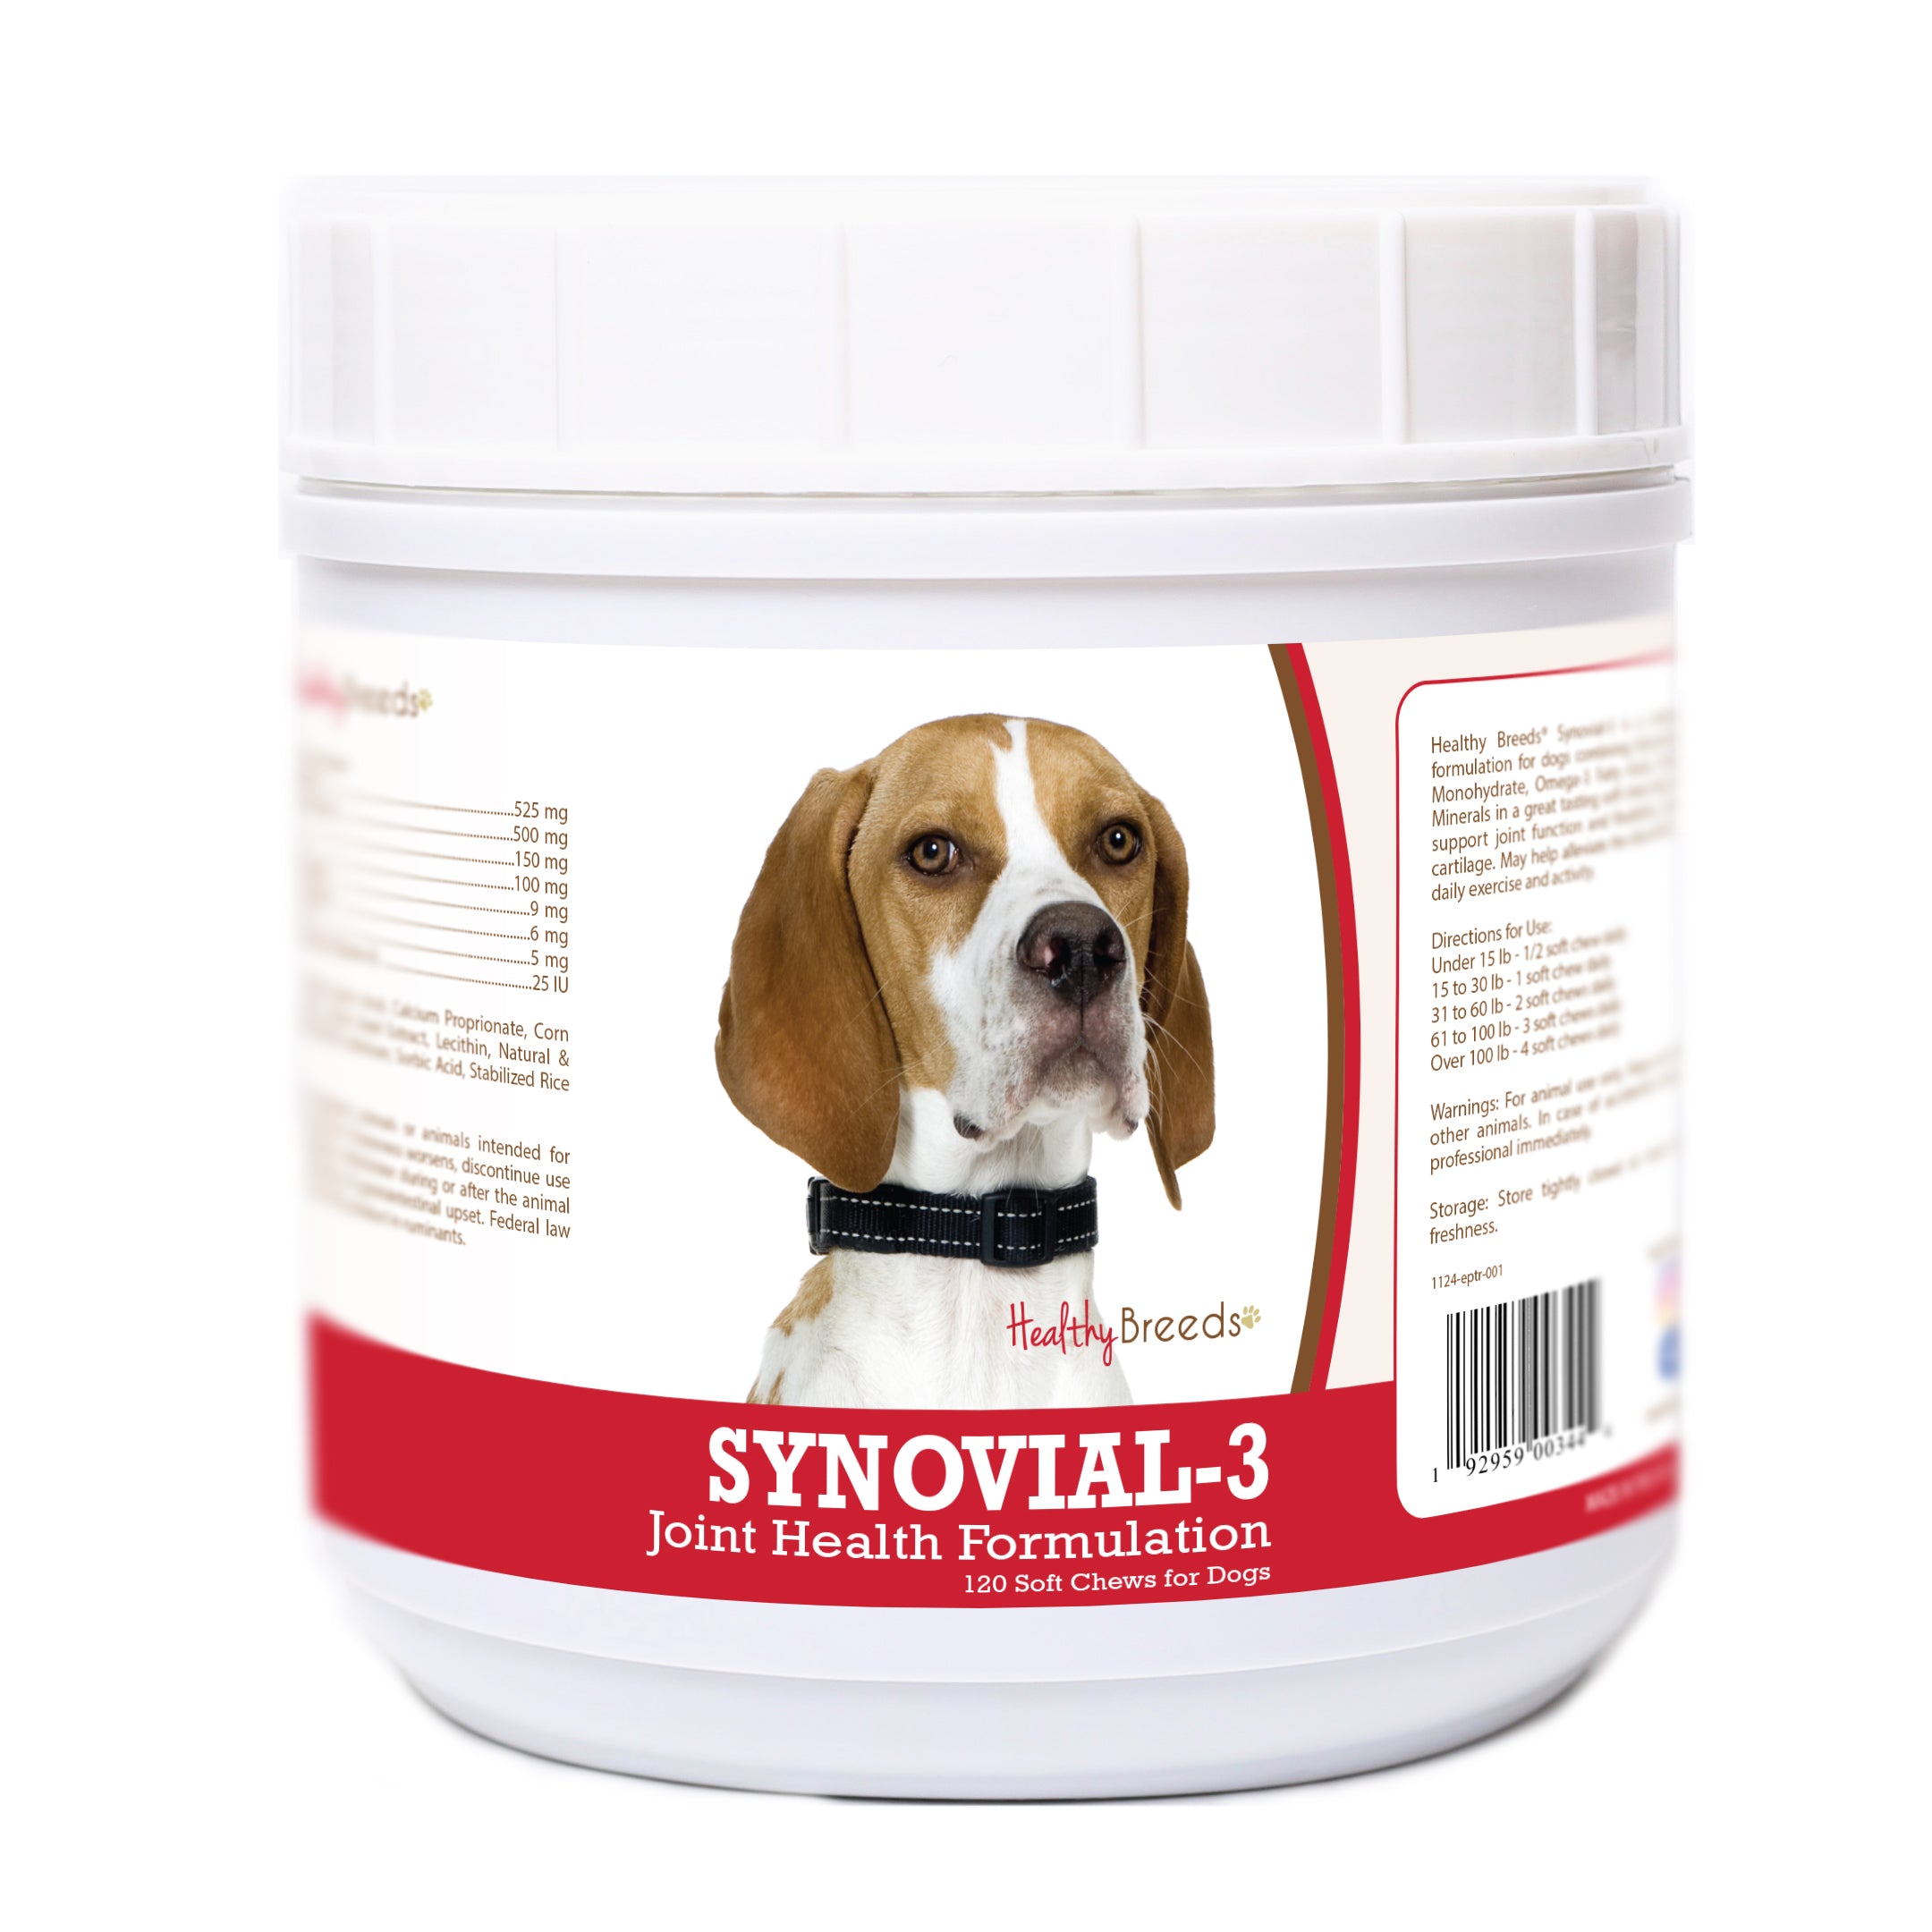 English Pointer Synovial-3 Joint Health Formulation Soft Chews 120 Count